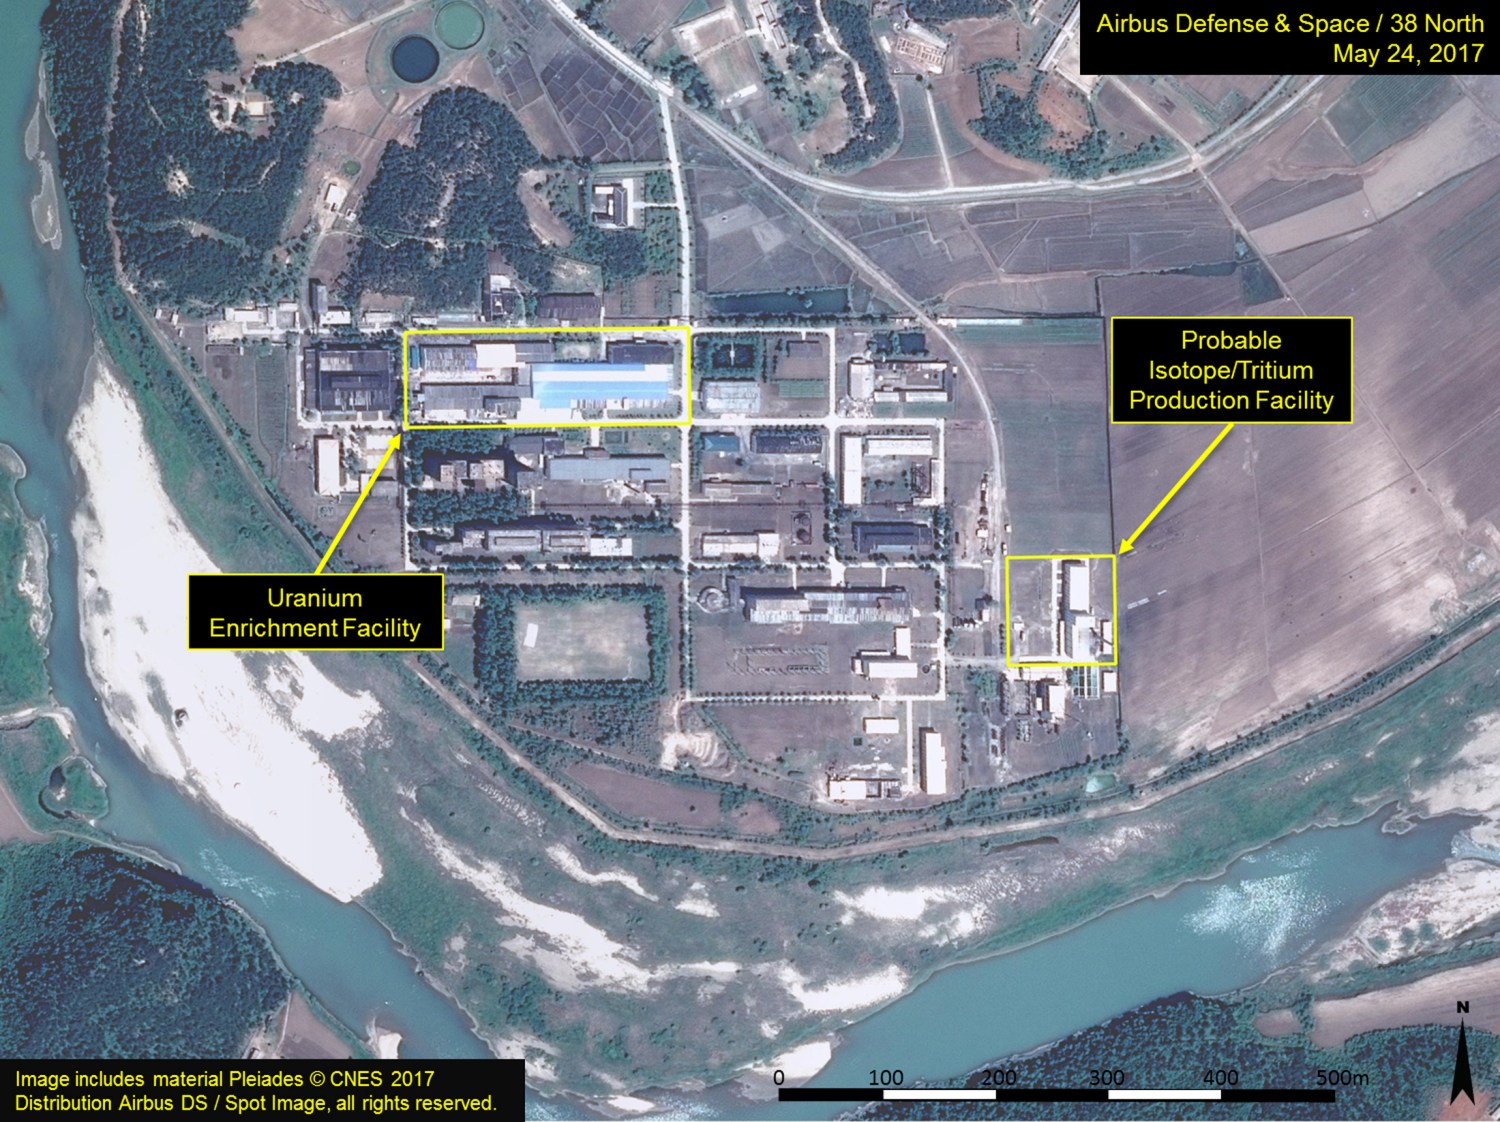 A satellite image of the radiochemical laboratory at the Yongbyon nuclear plant in North Korea by Airbus Defense & Space and 38 North released on July 14, 2017. Includes material Pleiades © CNES 2017 Distribution Airbus DS / Spot Image, all rights reserved. Courtesy Airbus Defense & Space and 38 North/Handout via REUTERS ATTENTION EDITORS - THIS IMAGE WAS PROVIDED BY A THIRD PARTY. MANDATORY CREDIT. NO RESALES. NO ARCHIVES - RTX3BHJ9